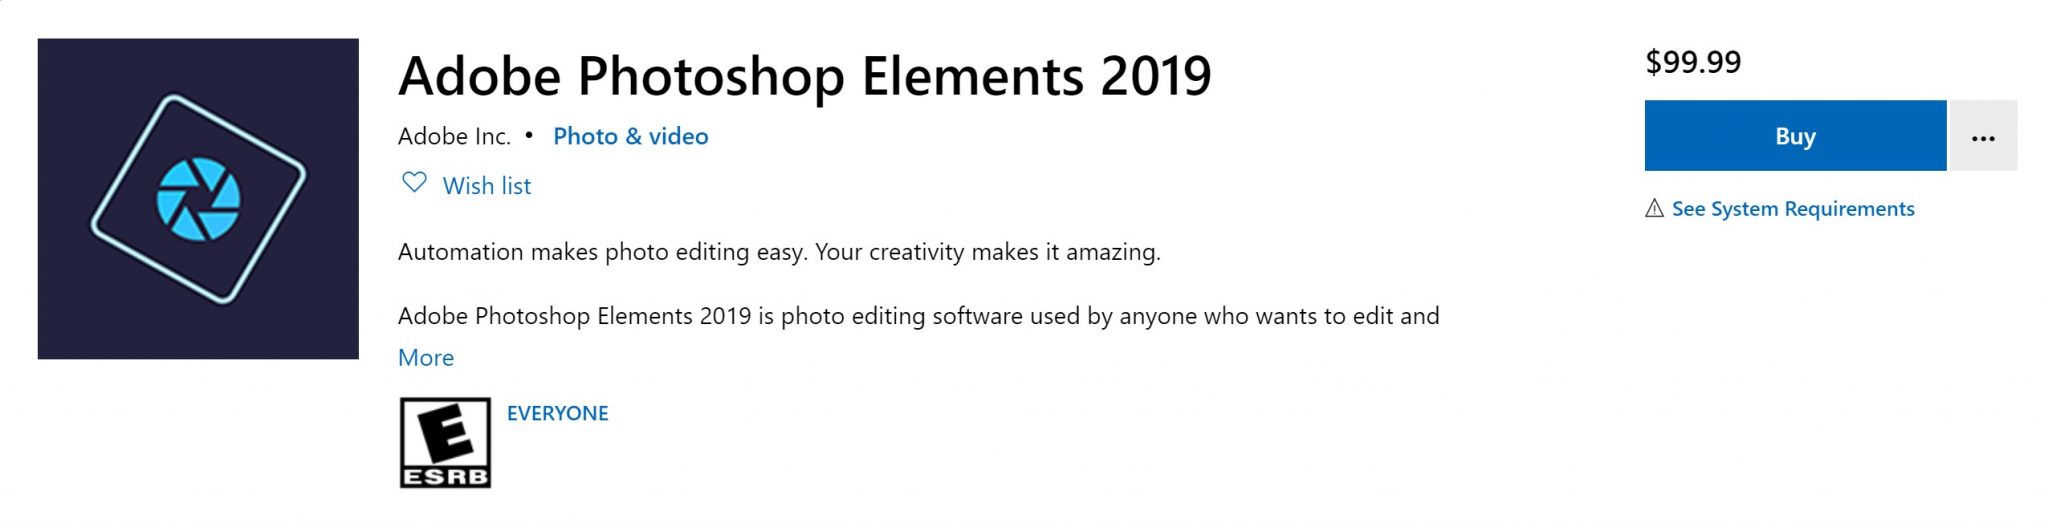 how to change the text on adobe photoshop 2019